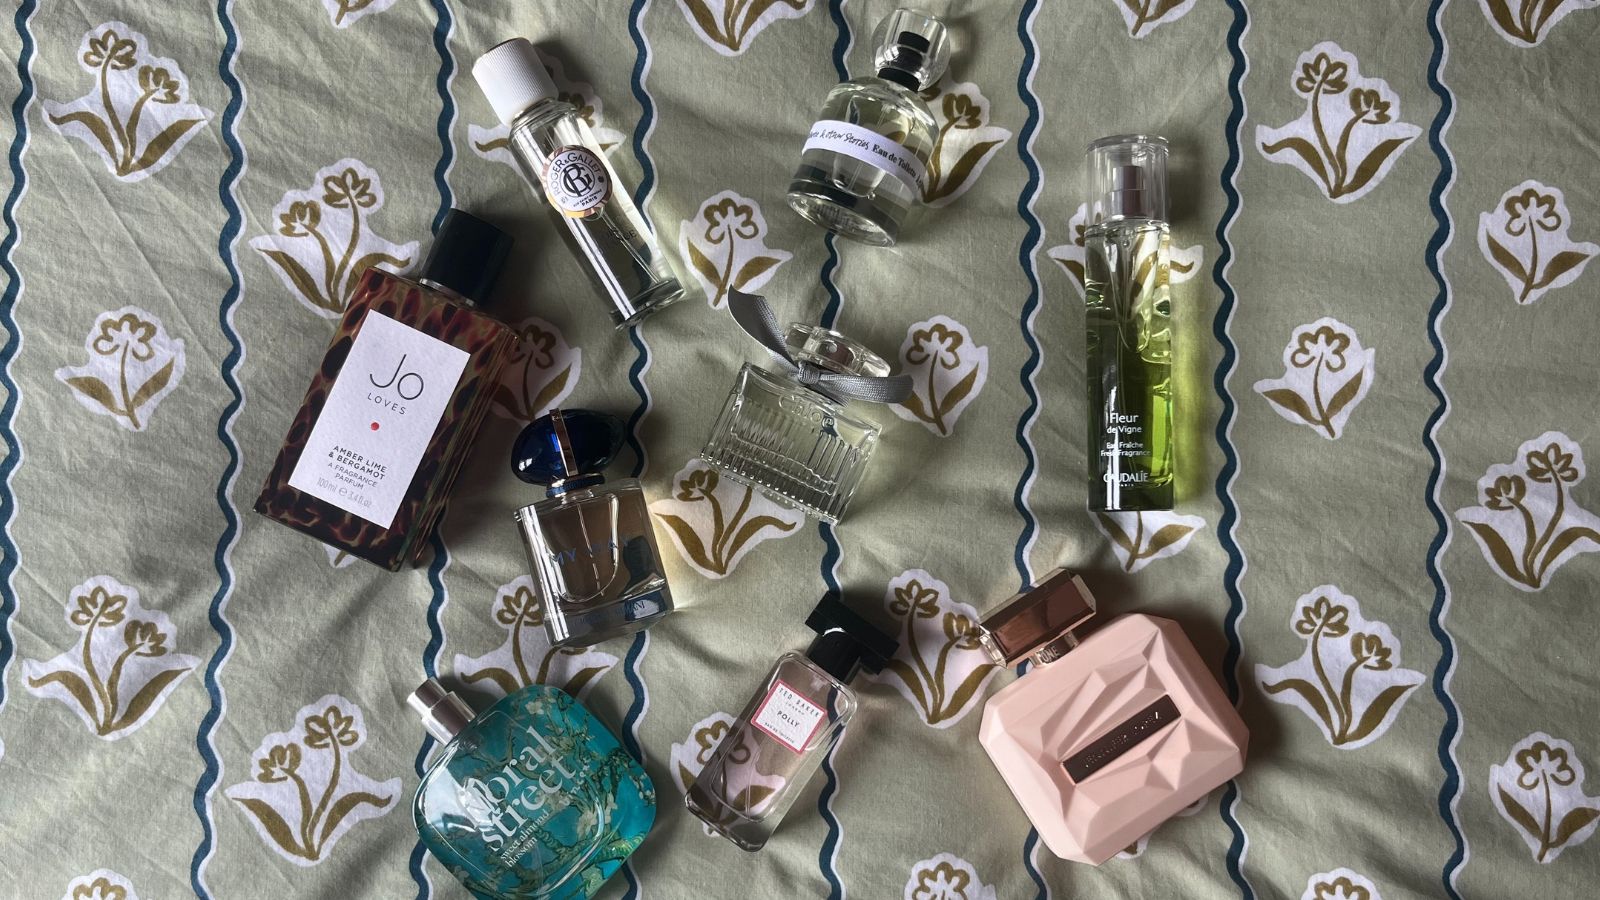 an image of some of the mood-boosting perfumes we tested